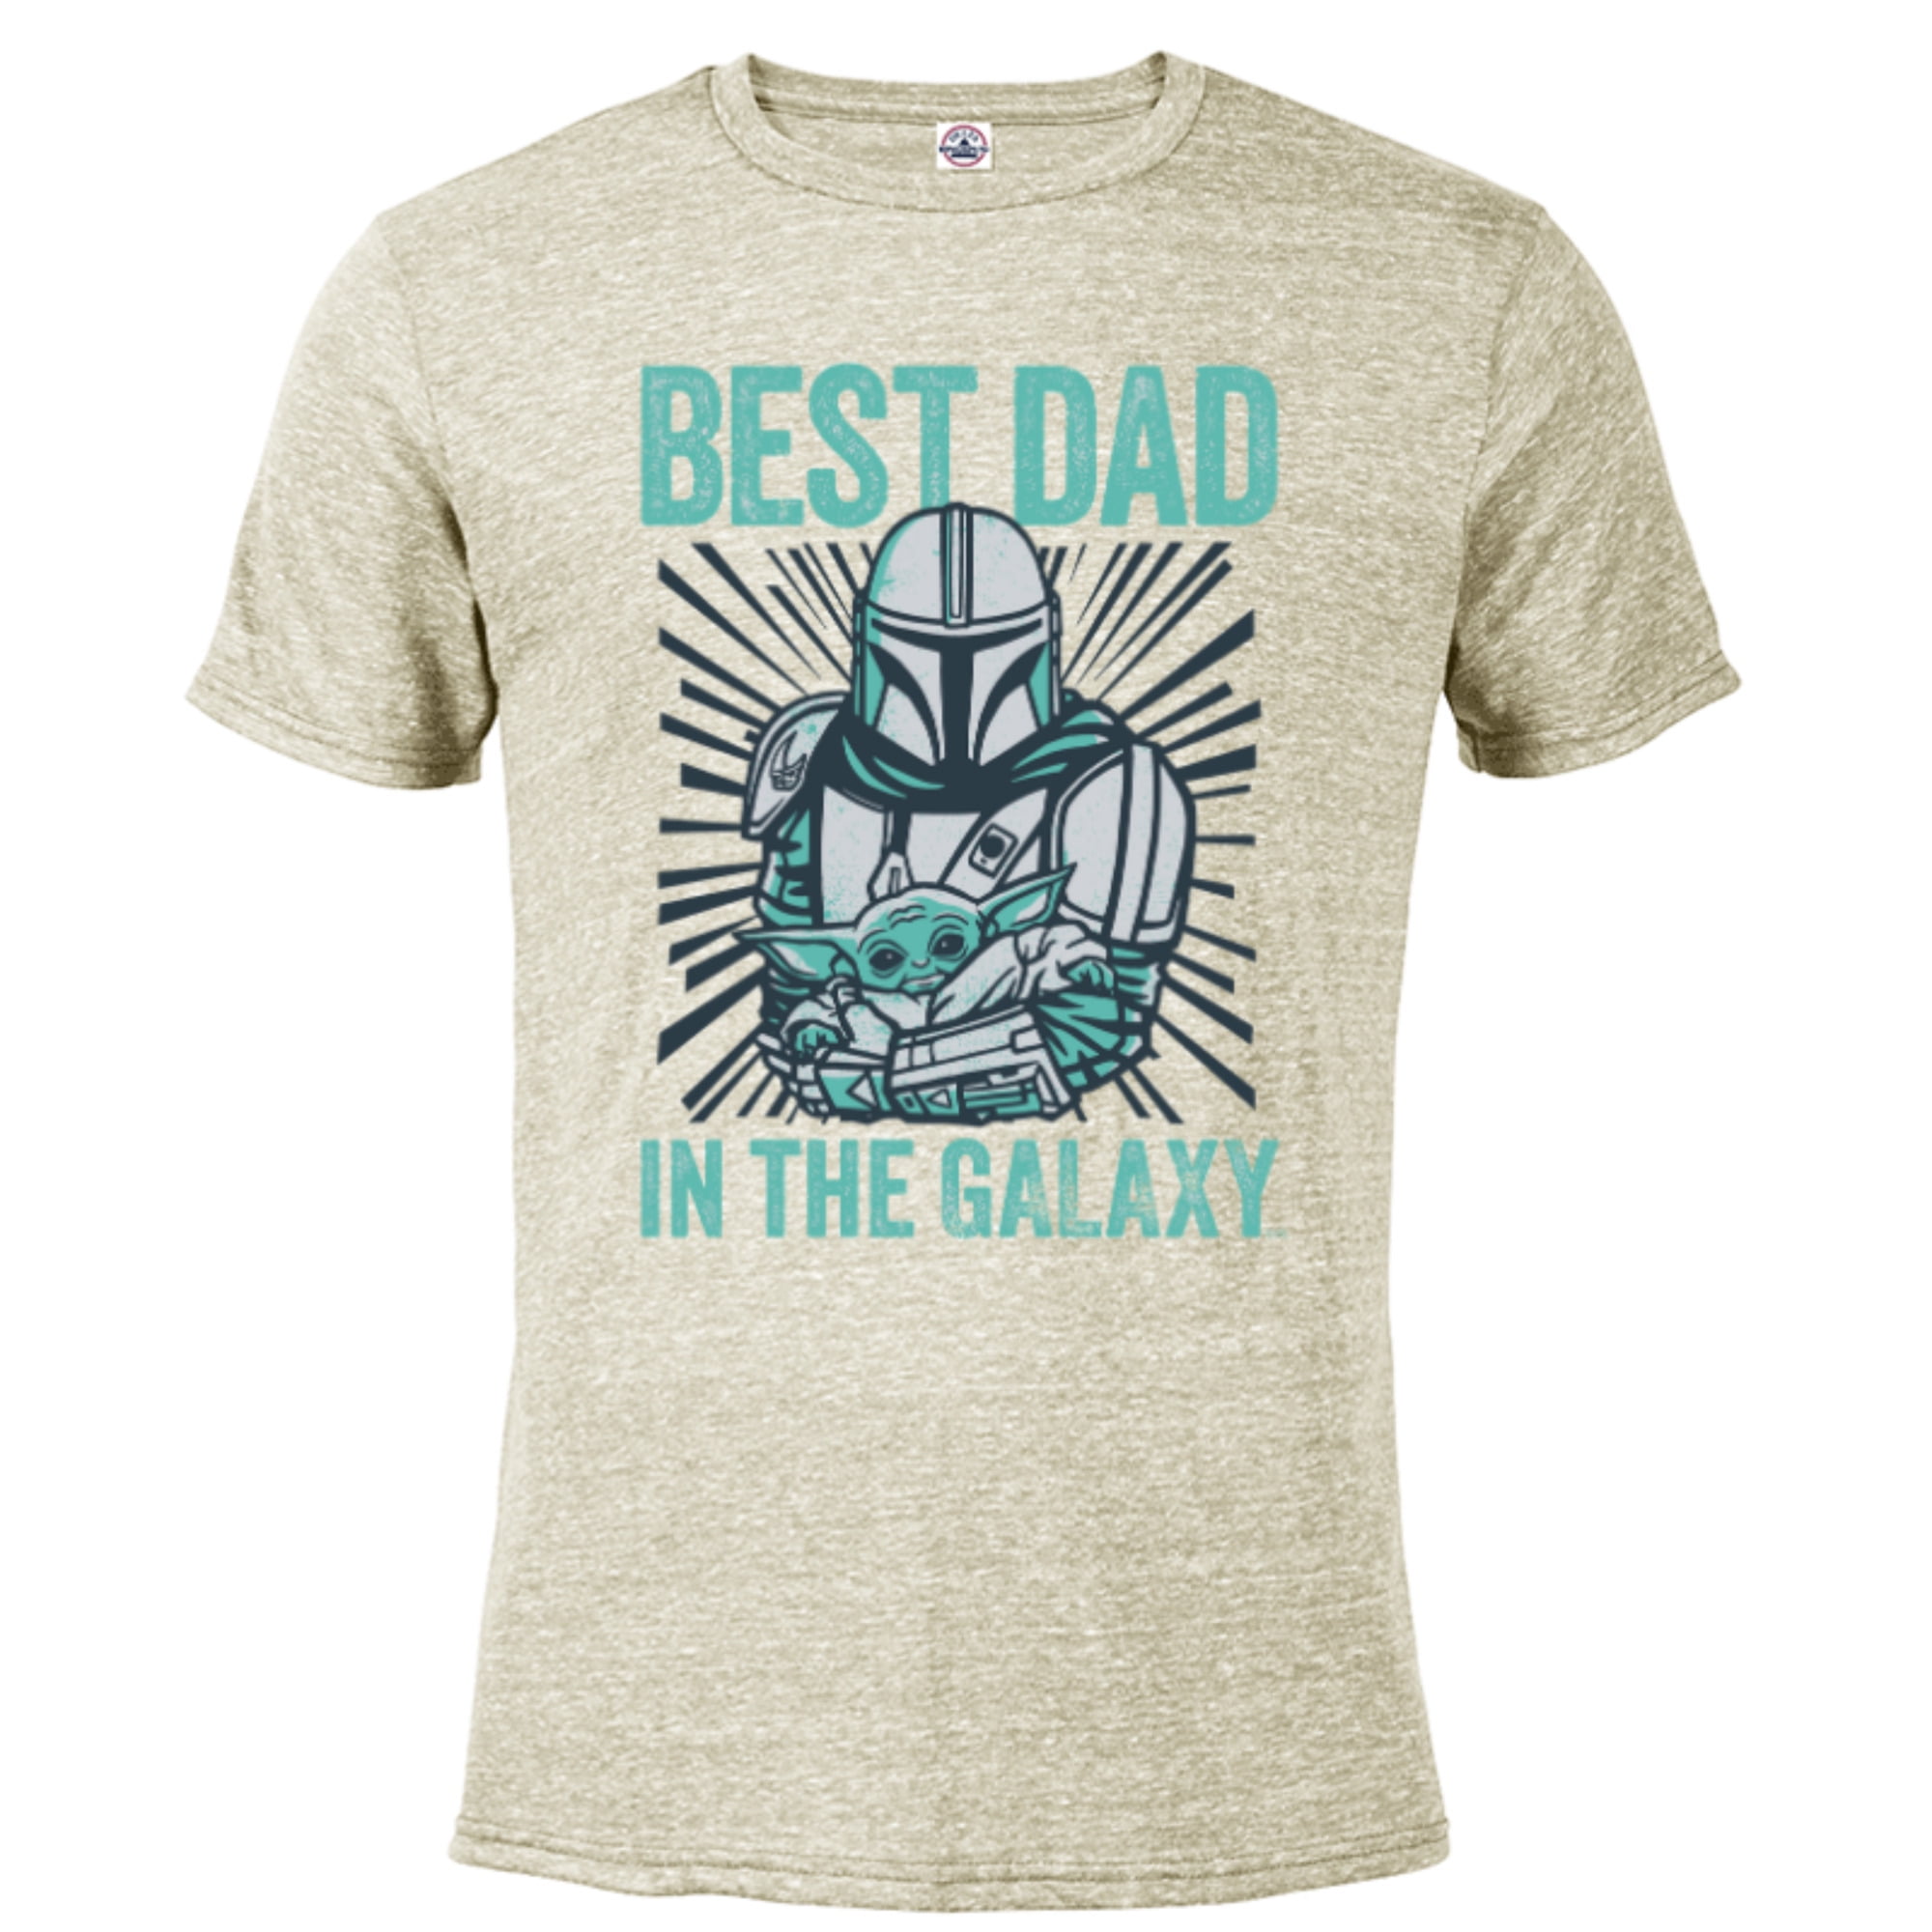 enkelt gang Hurtig konstant Star Wars The Mandalorian and Grogu Best Dad in the Galaxy - Short Sleeve  Blended T-Shirt for Adults - Customized-Putty Snow Heather - Walmart.com